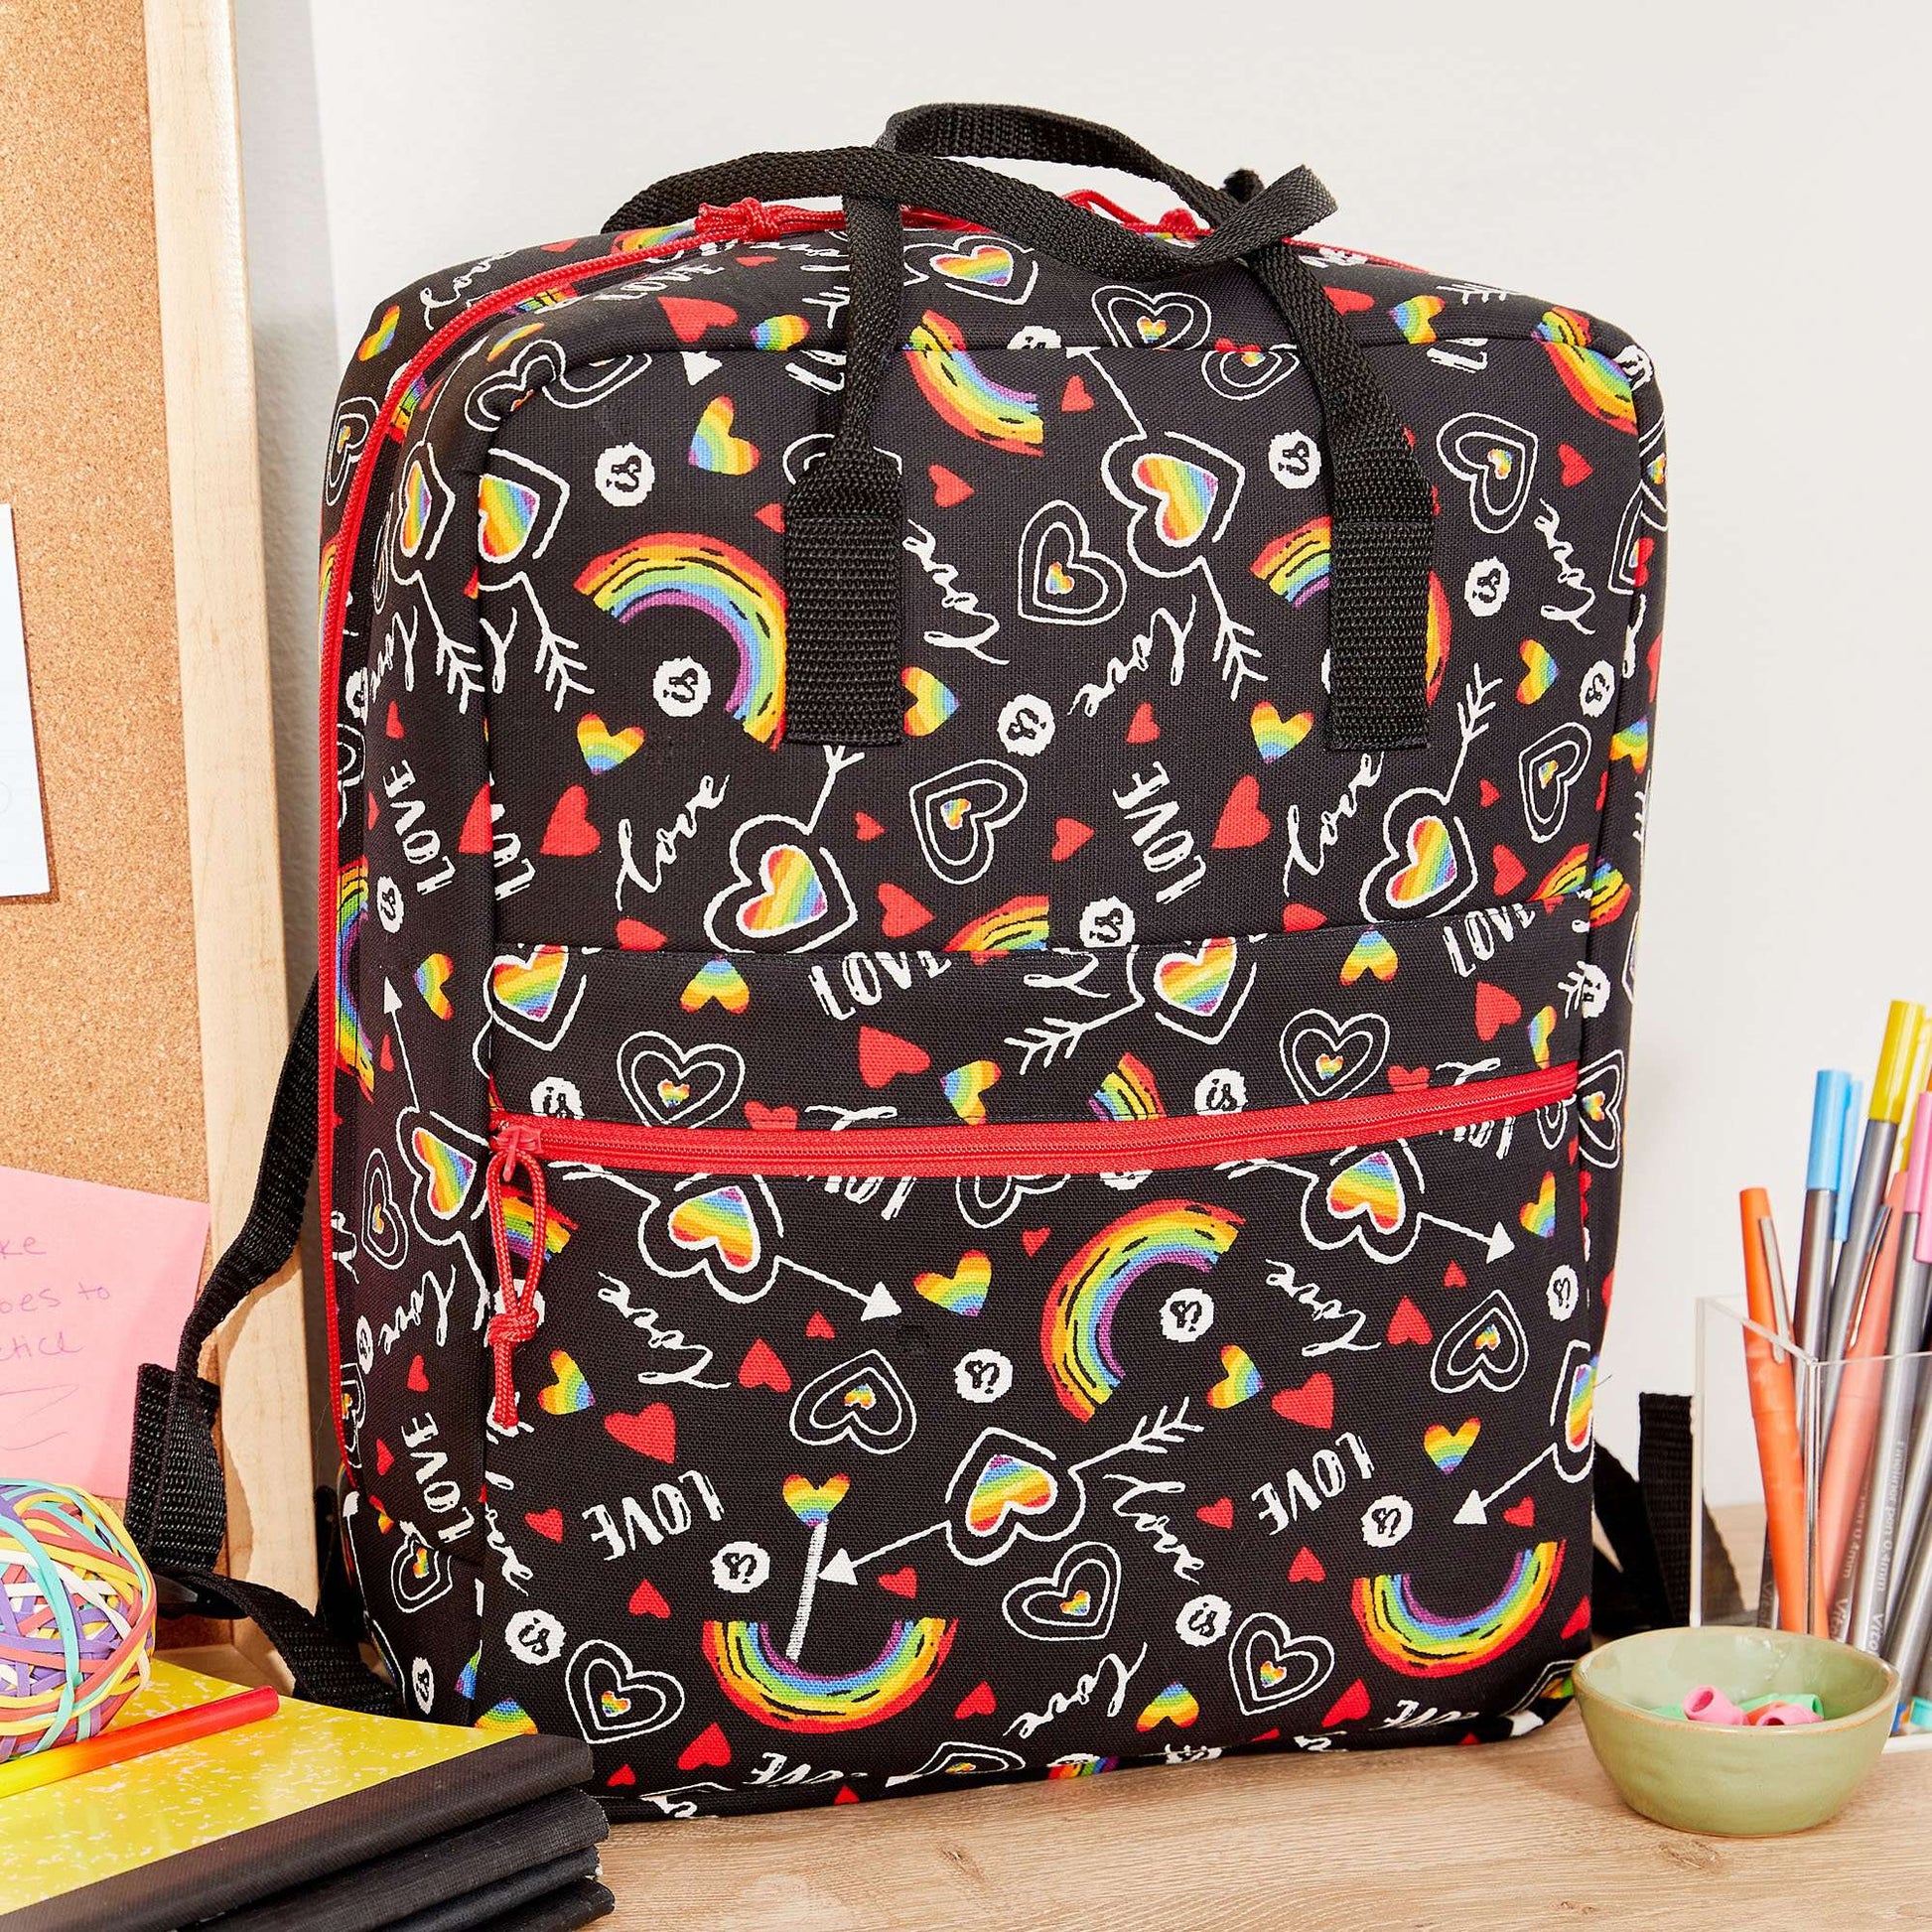 Free Coats & Clark Sewing Back To School Book Bag Pattern